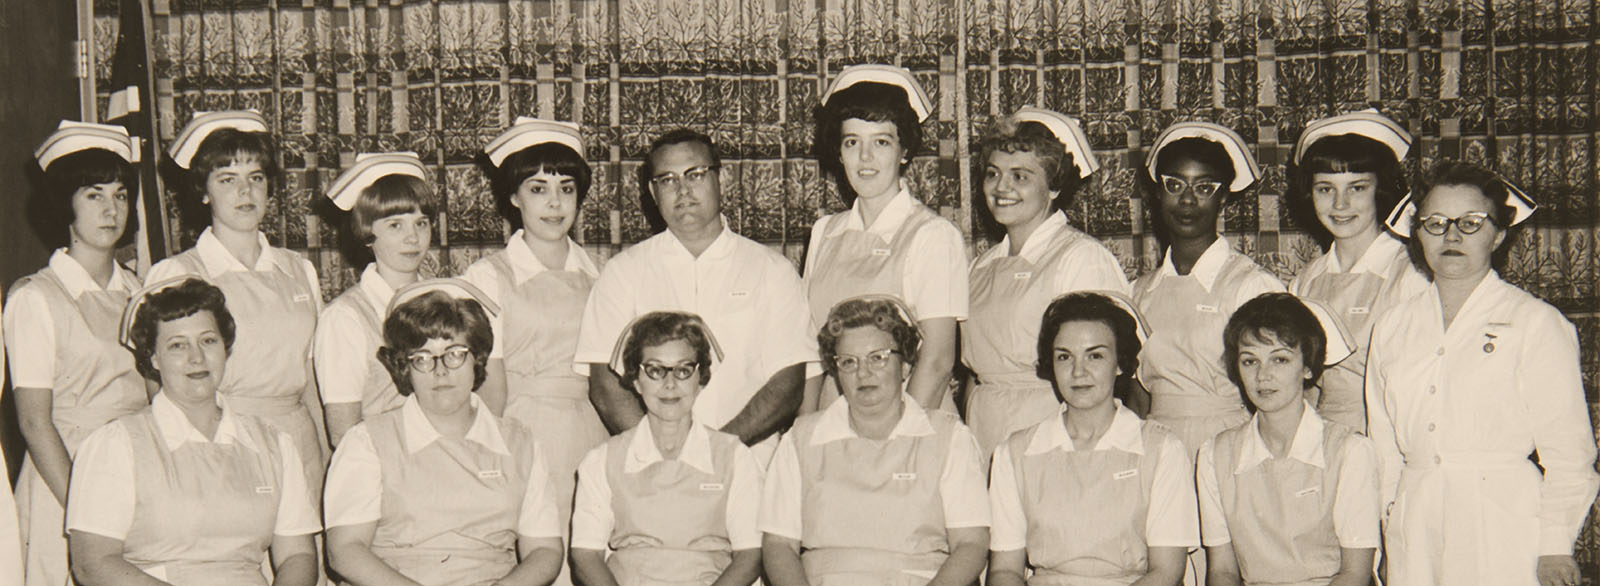 Group photo of nurses from the 1960s